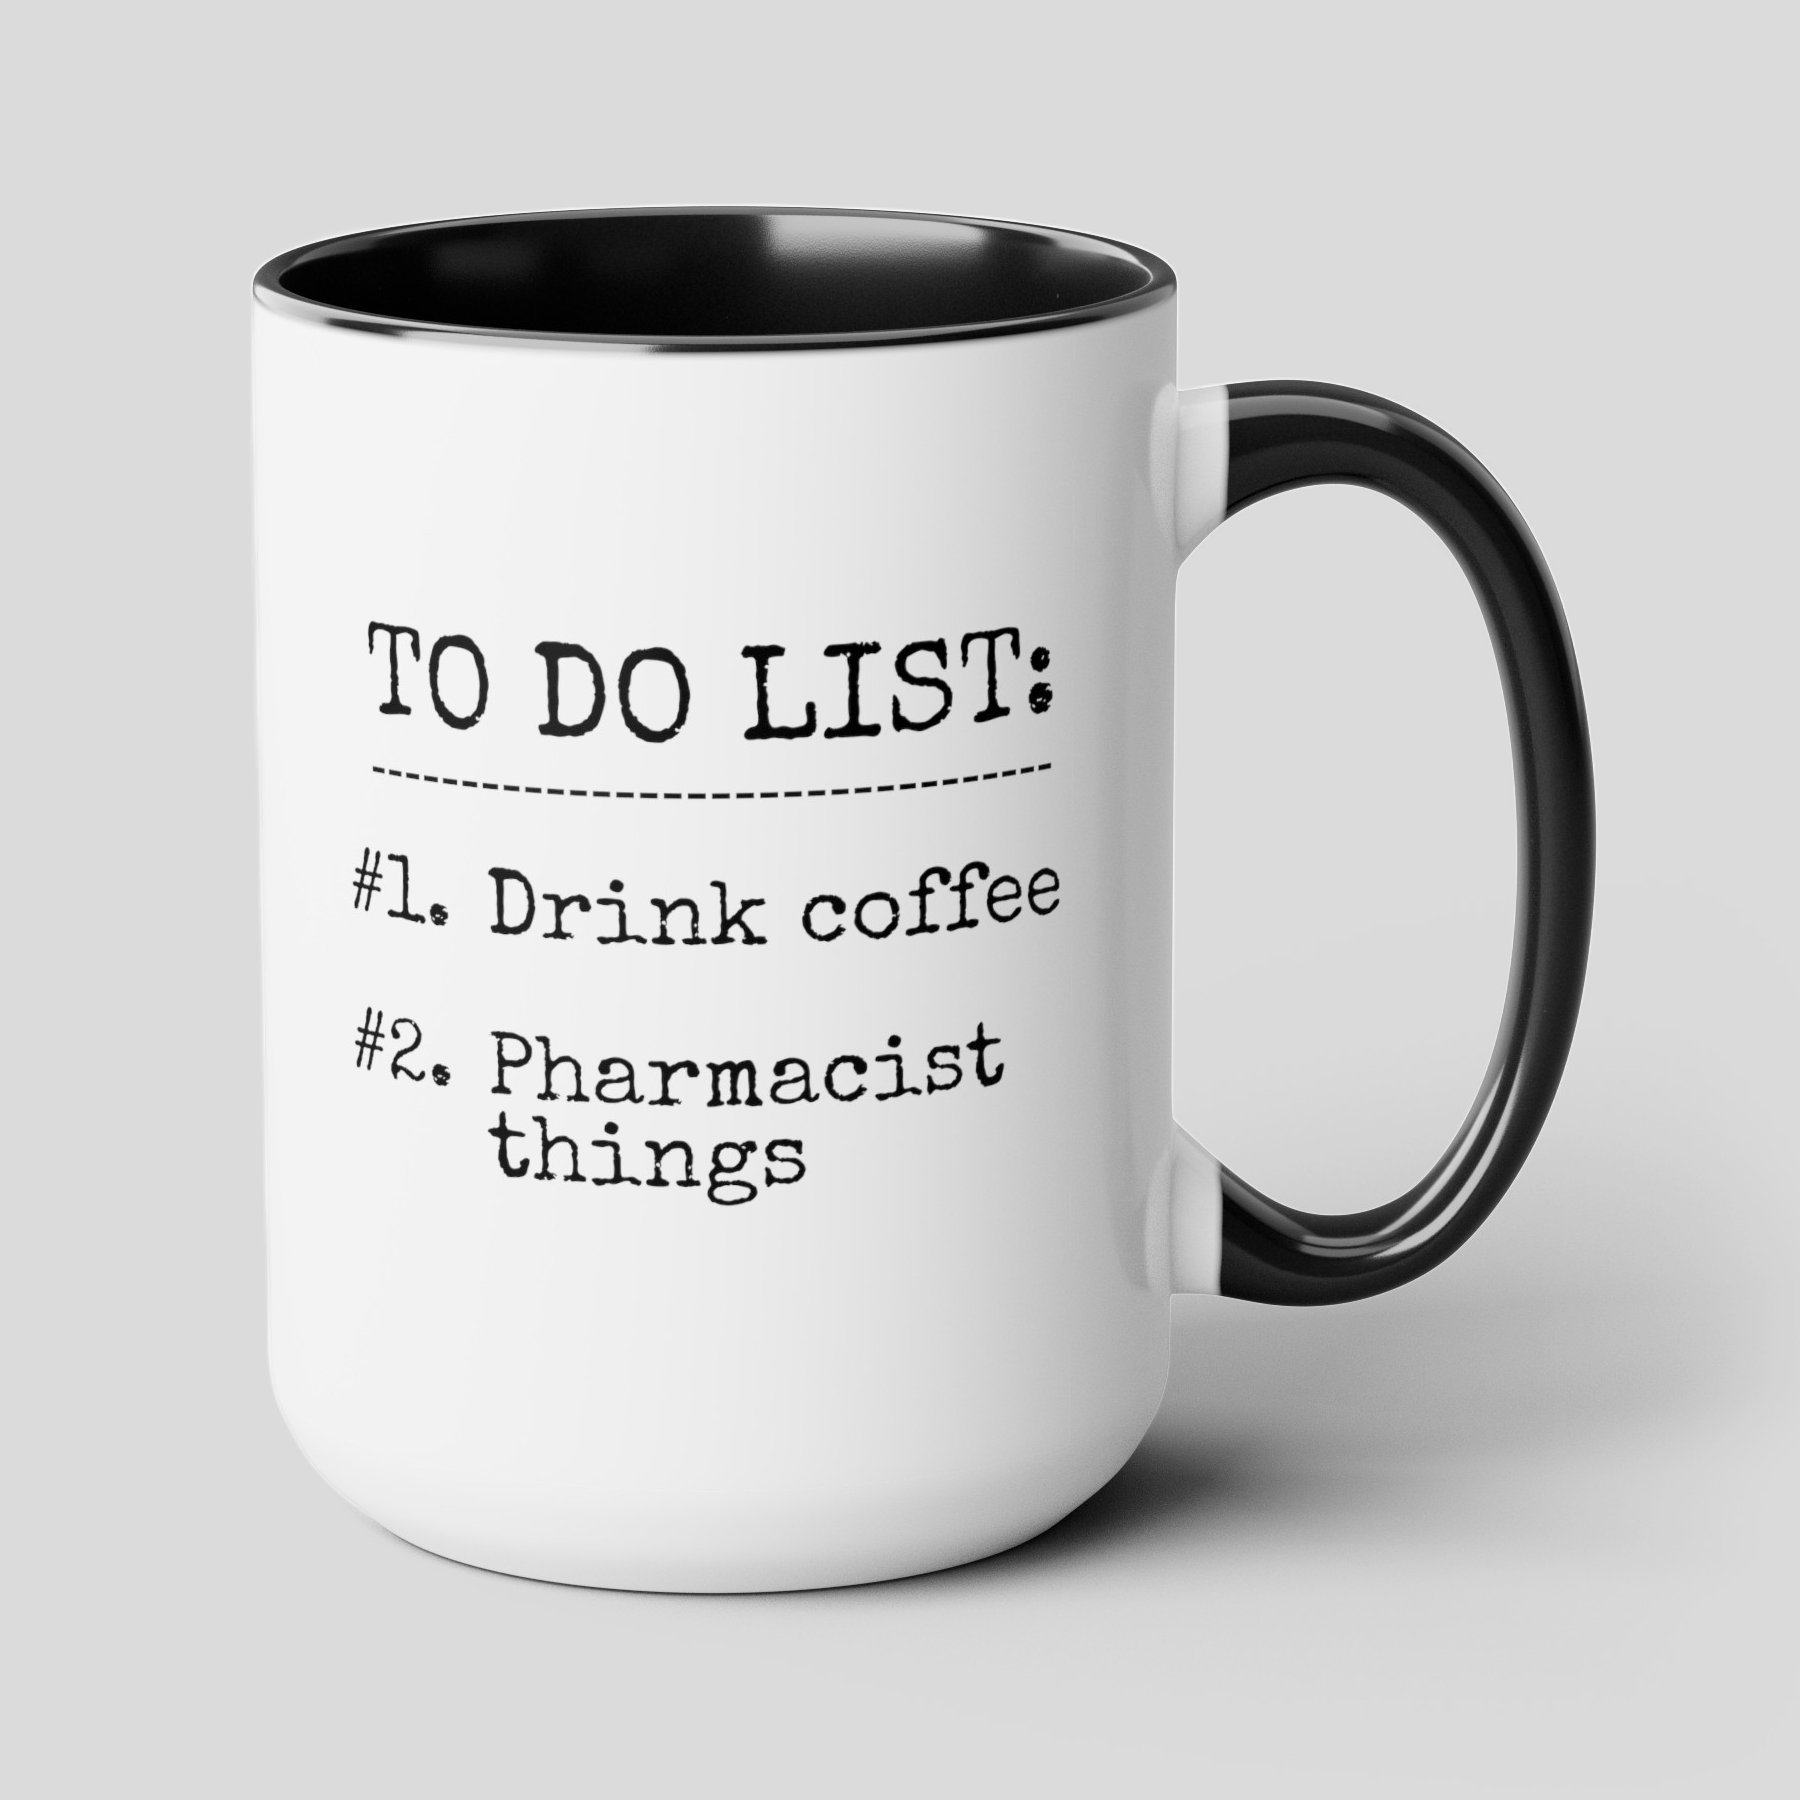 To Do List Drink Coffee Pharmacist Things 15oz white with black accent funny large coffee mug gift for pharmacy medicine graduation waveywares wavey wares wavywares wavy wares cover